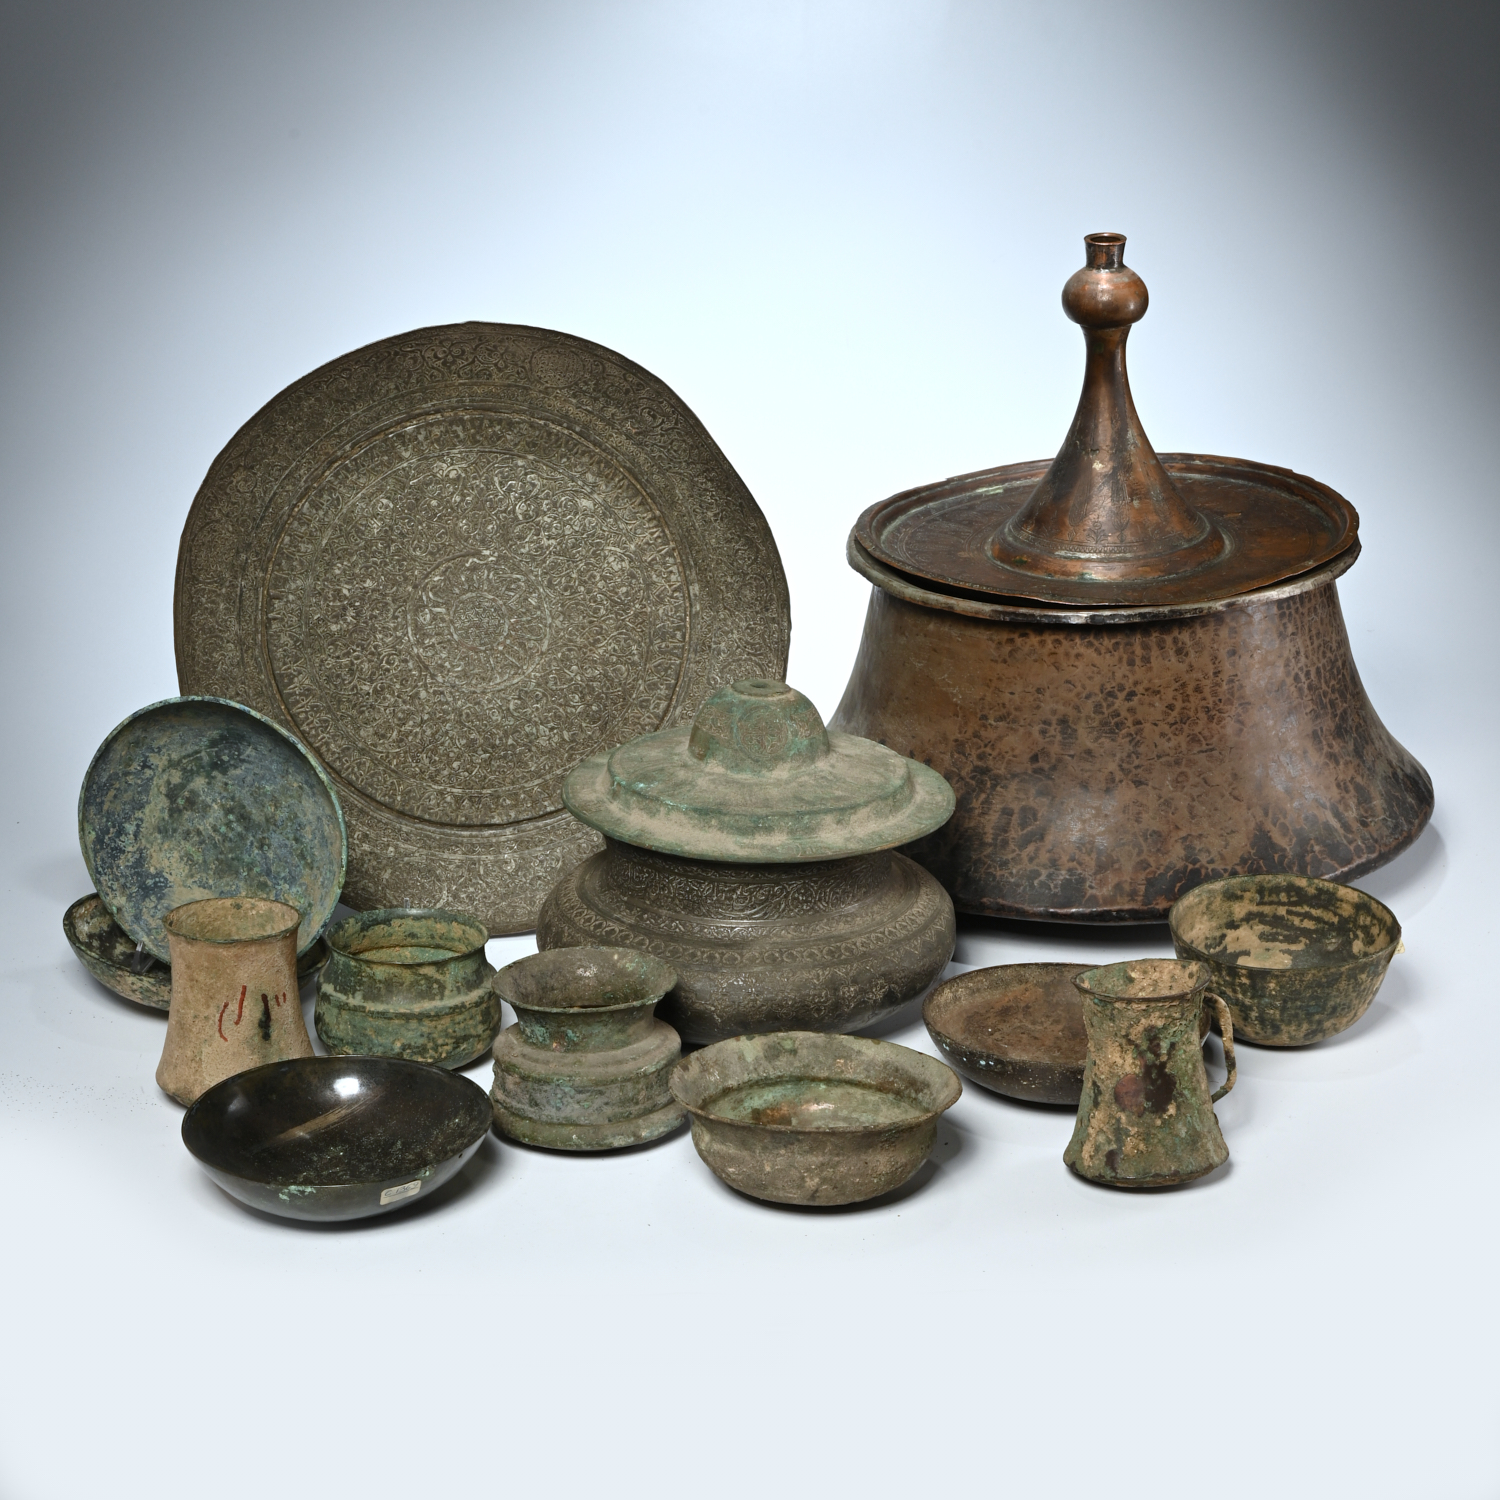 ANTIQUE ISLAMIC AND PERSIAN METALWARE 30bf51